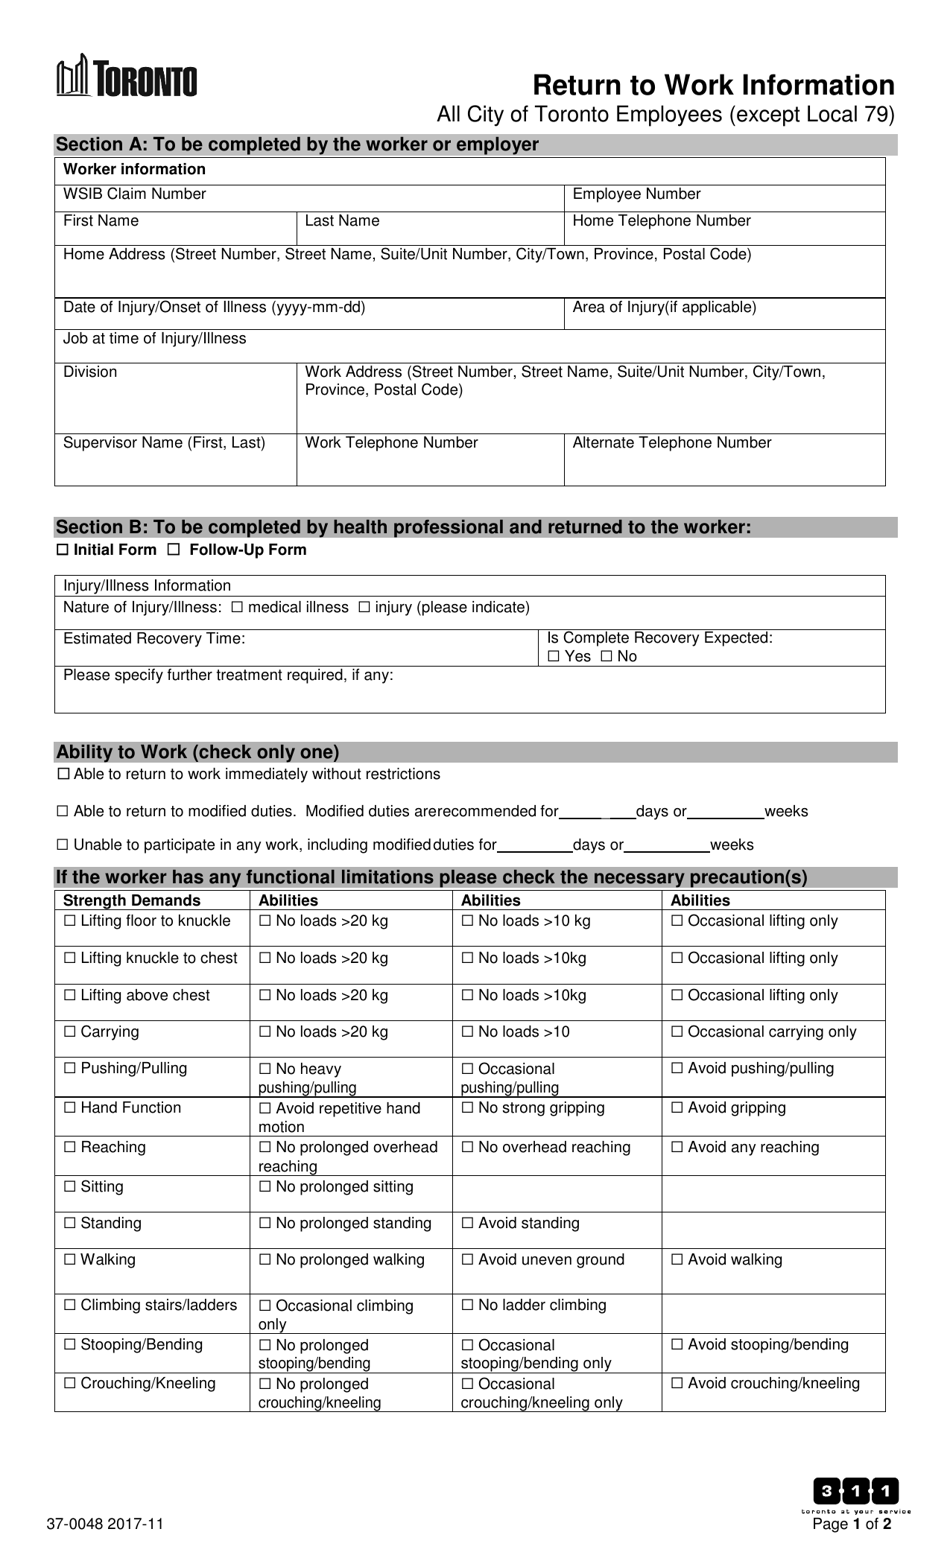 Form 37-0048 Return to Work Information - All City of Toronto Employees (Except Local 79) - City of Toronto, Ontario, Canada, Page 1